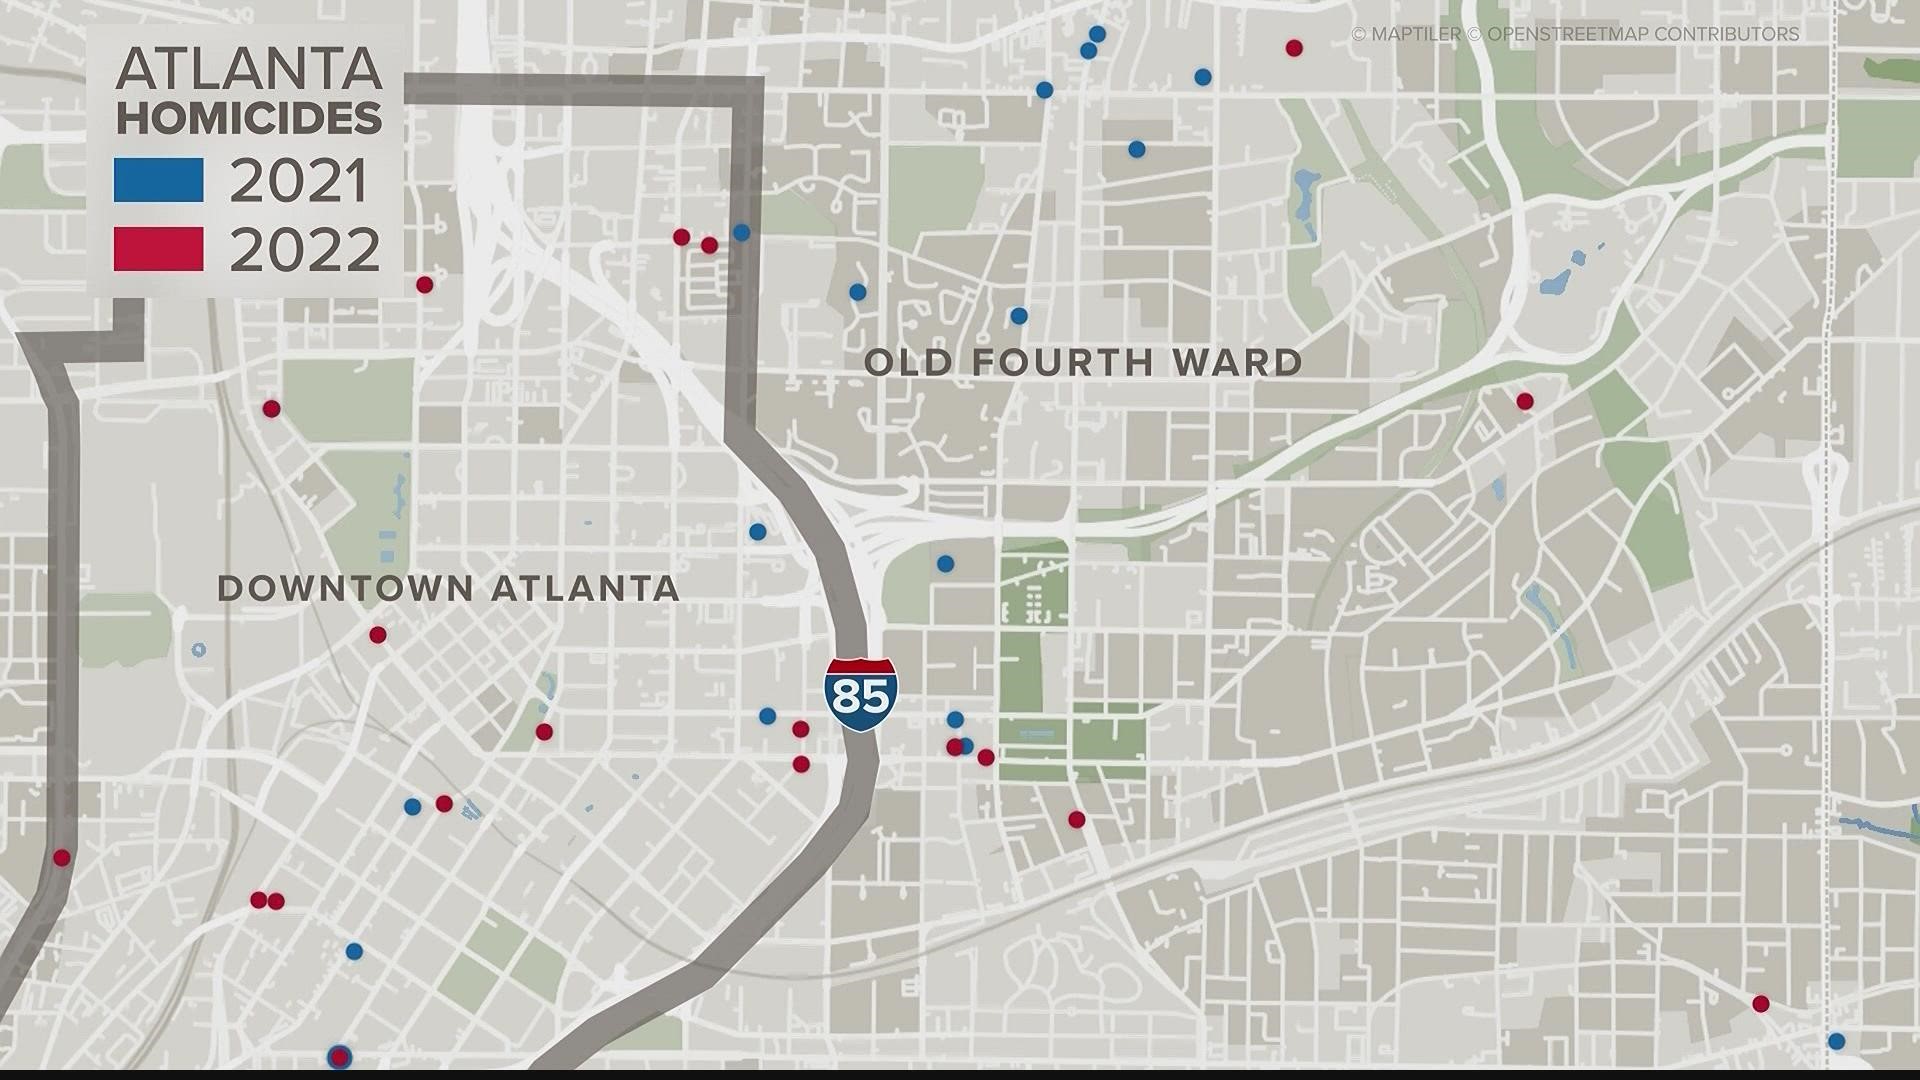 Atlanta's total number of reported homicides jumped 60% from 2019 to 2020 -- then again just slightly last year. In 2022, the city is outpacing last year's numbers.